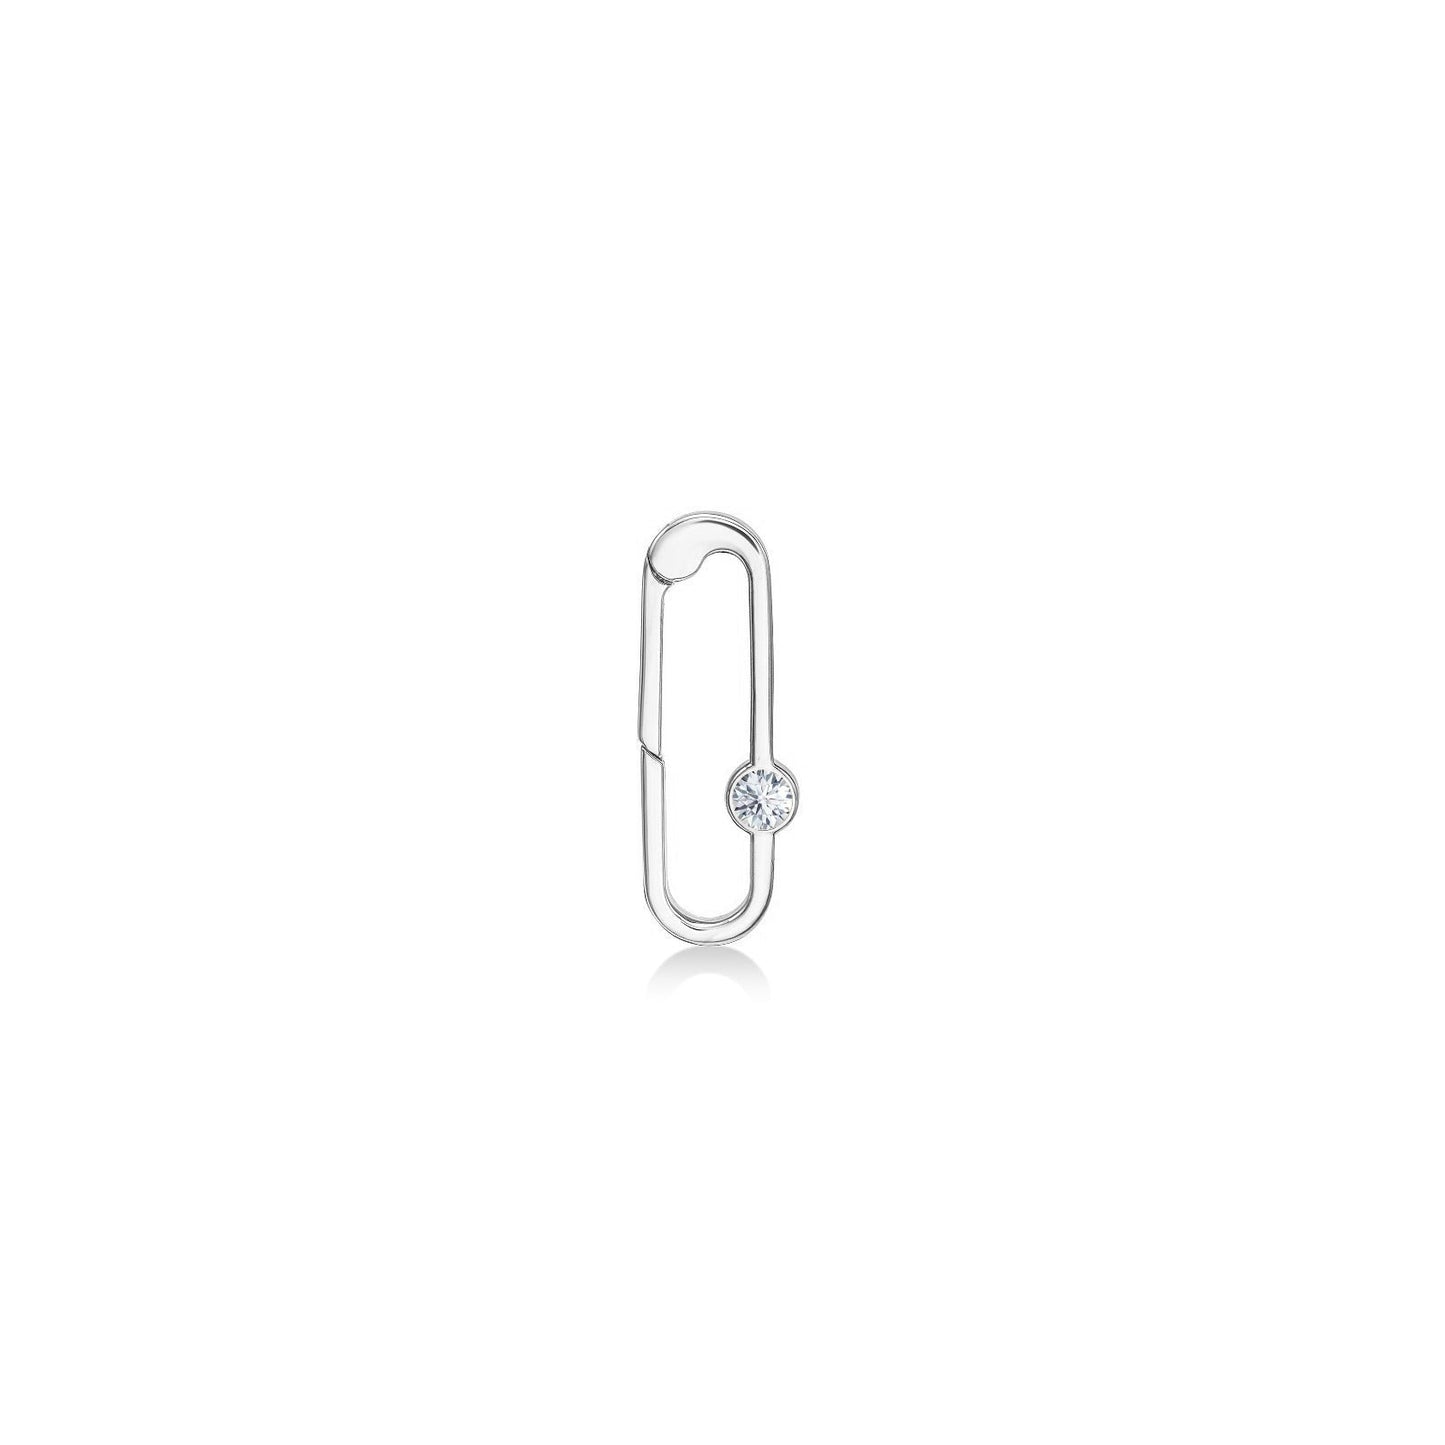 14k white gold paperclip charm lock with diamond